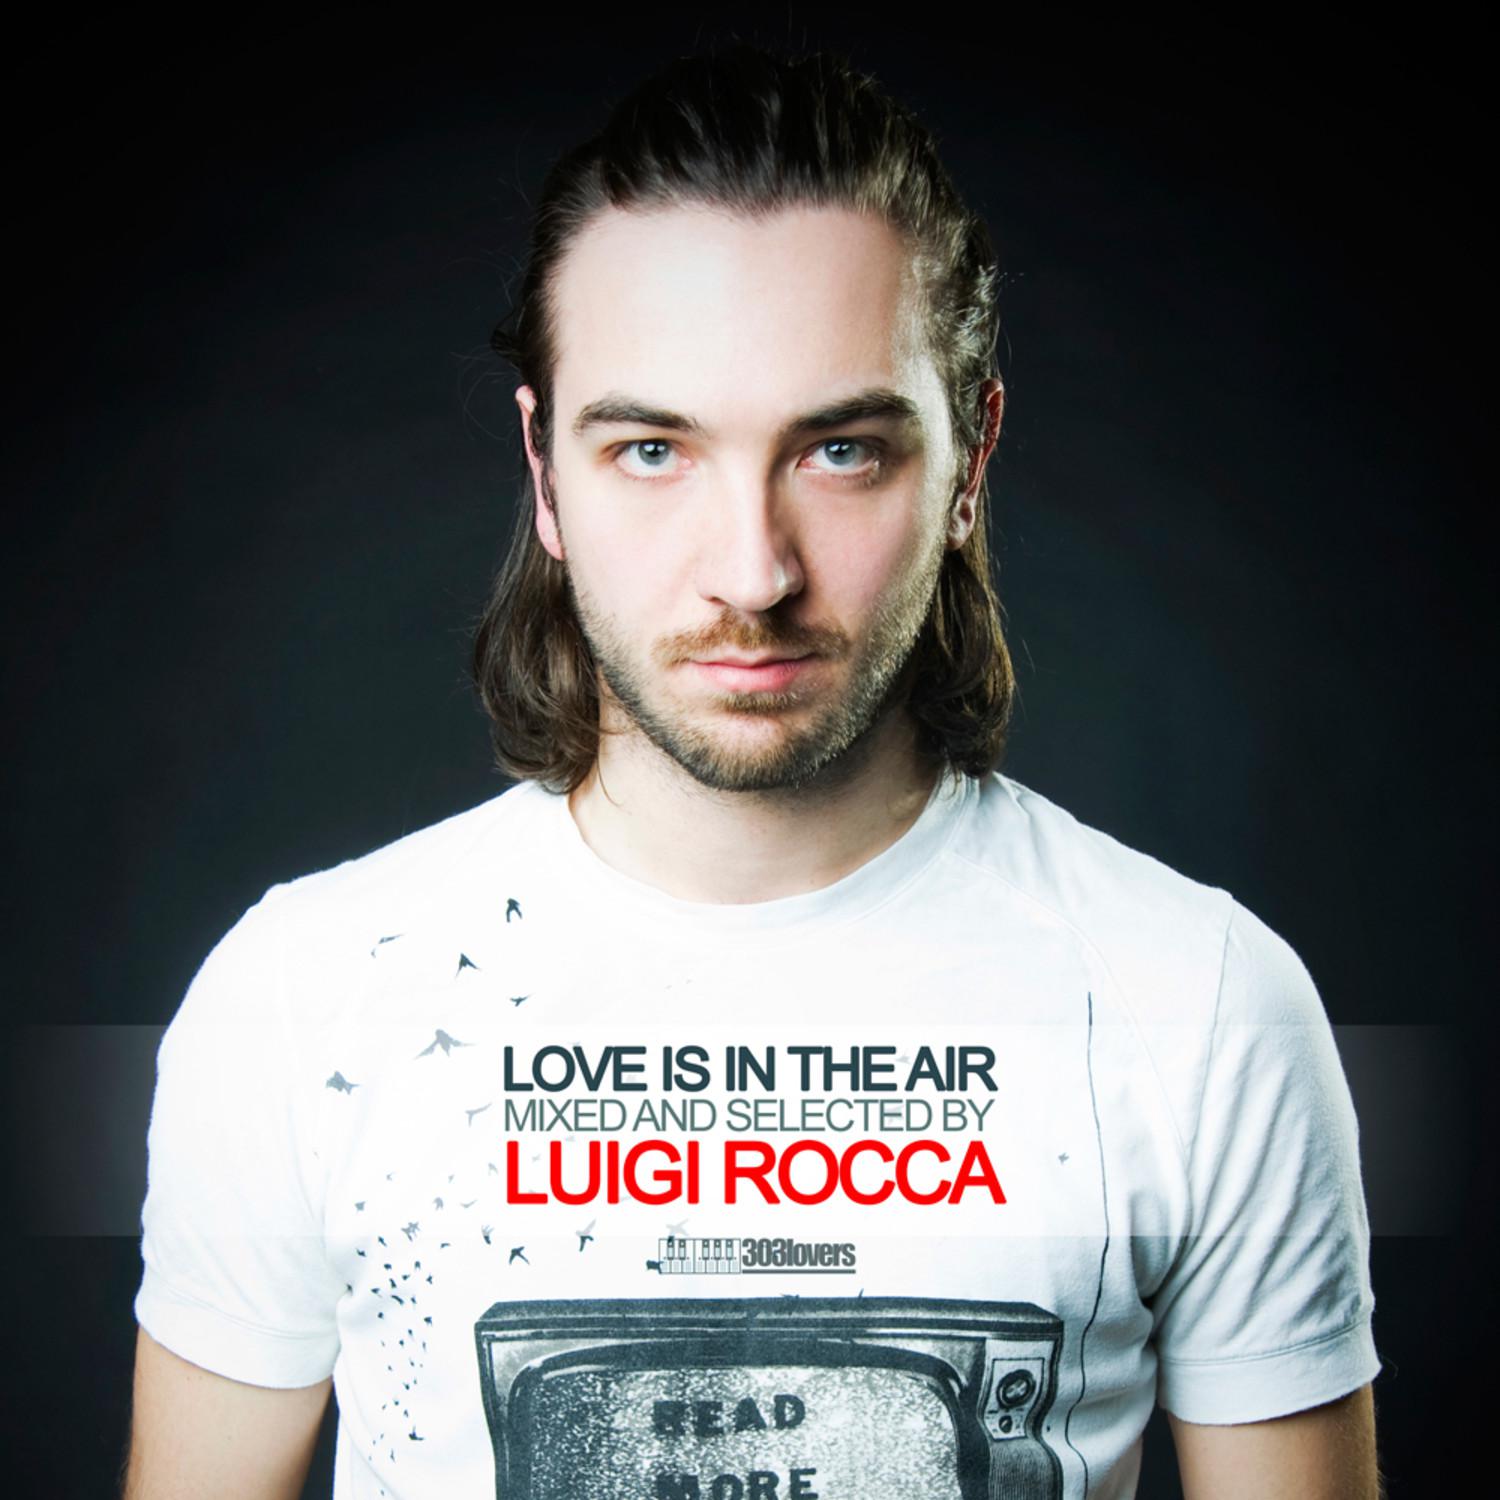 Love Is In The Air by Luigi Rocca